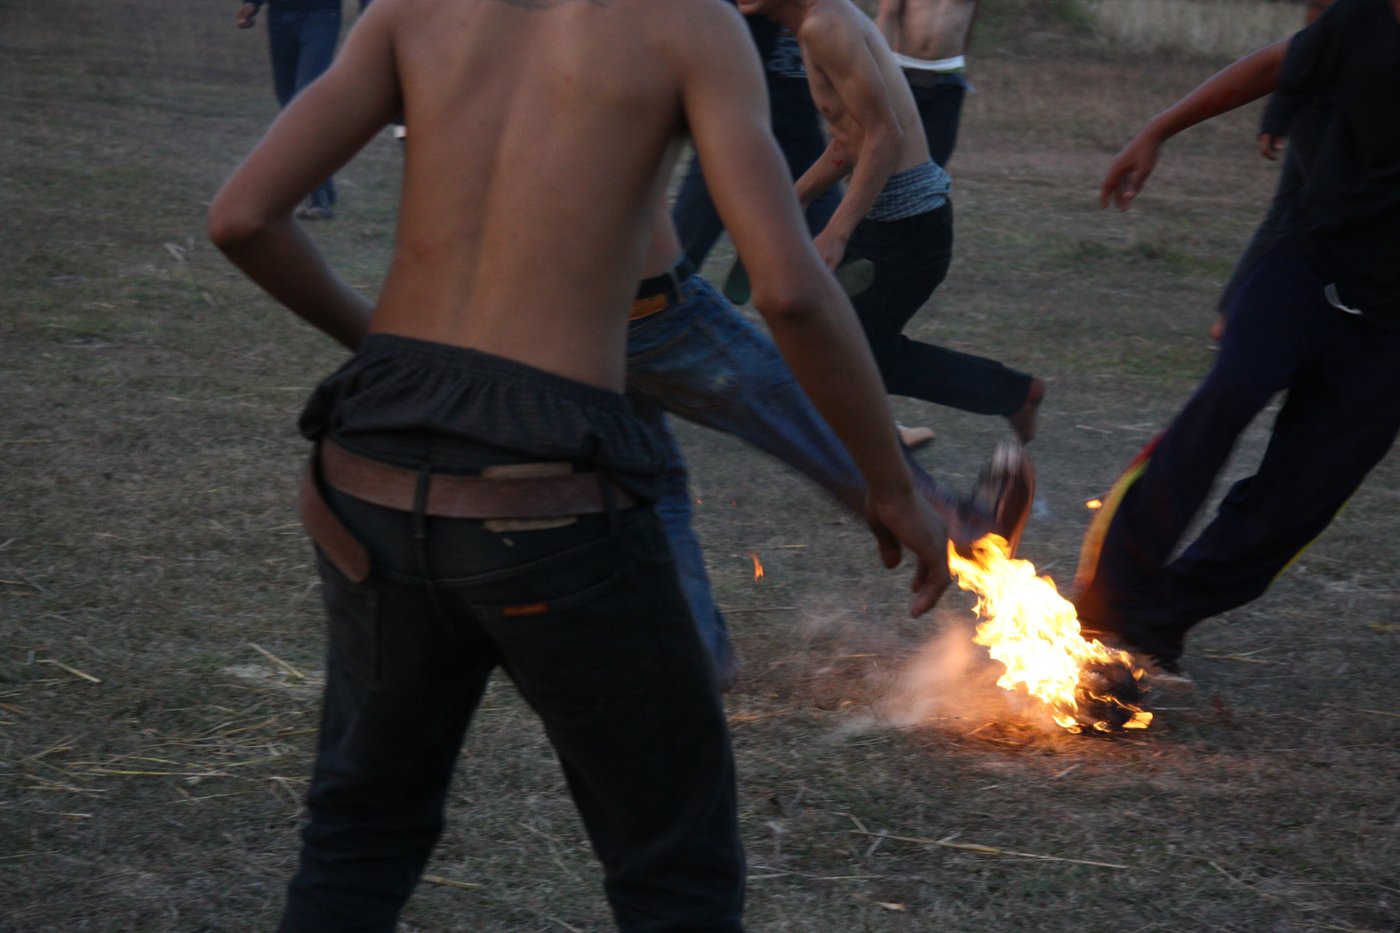 Legs, feet and partly naked upper bodies around a burning ball.